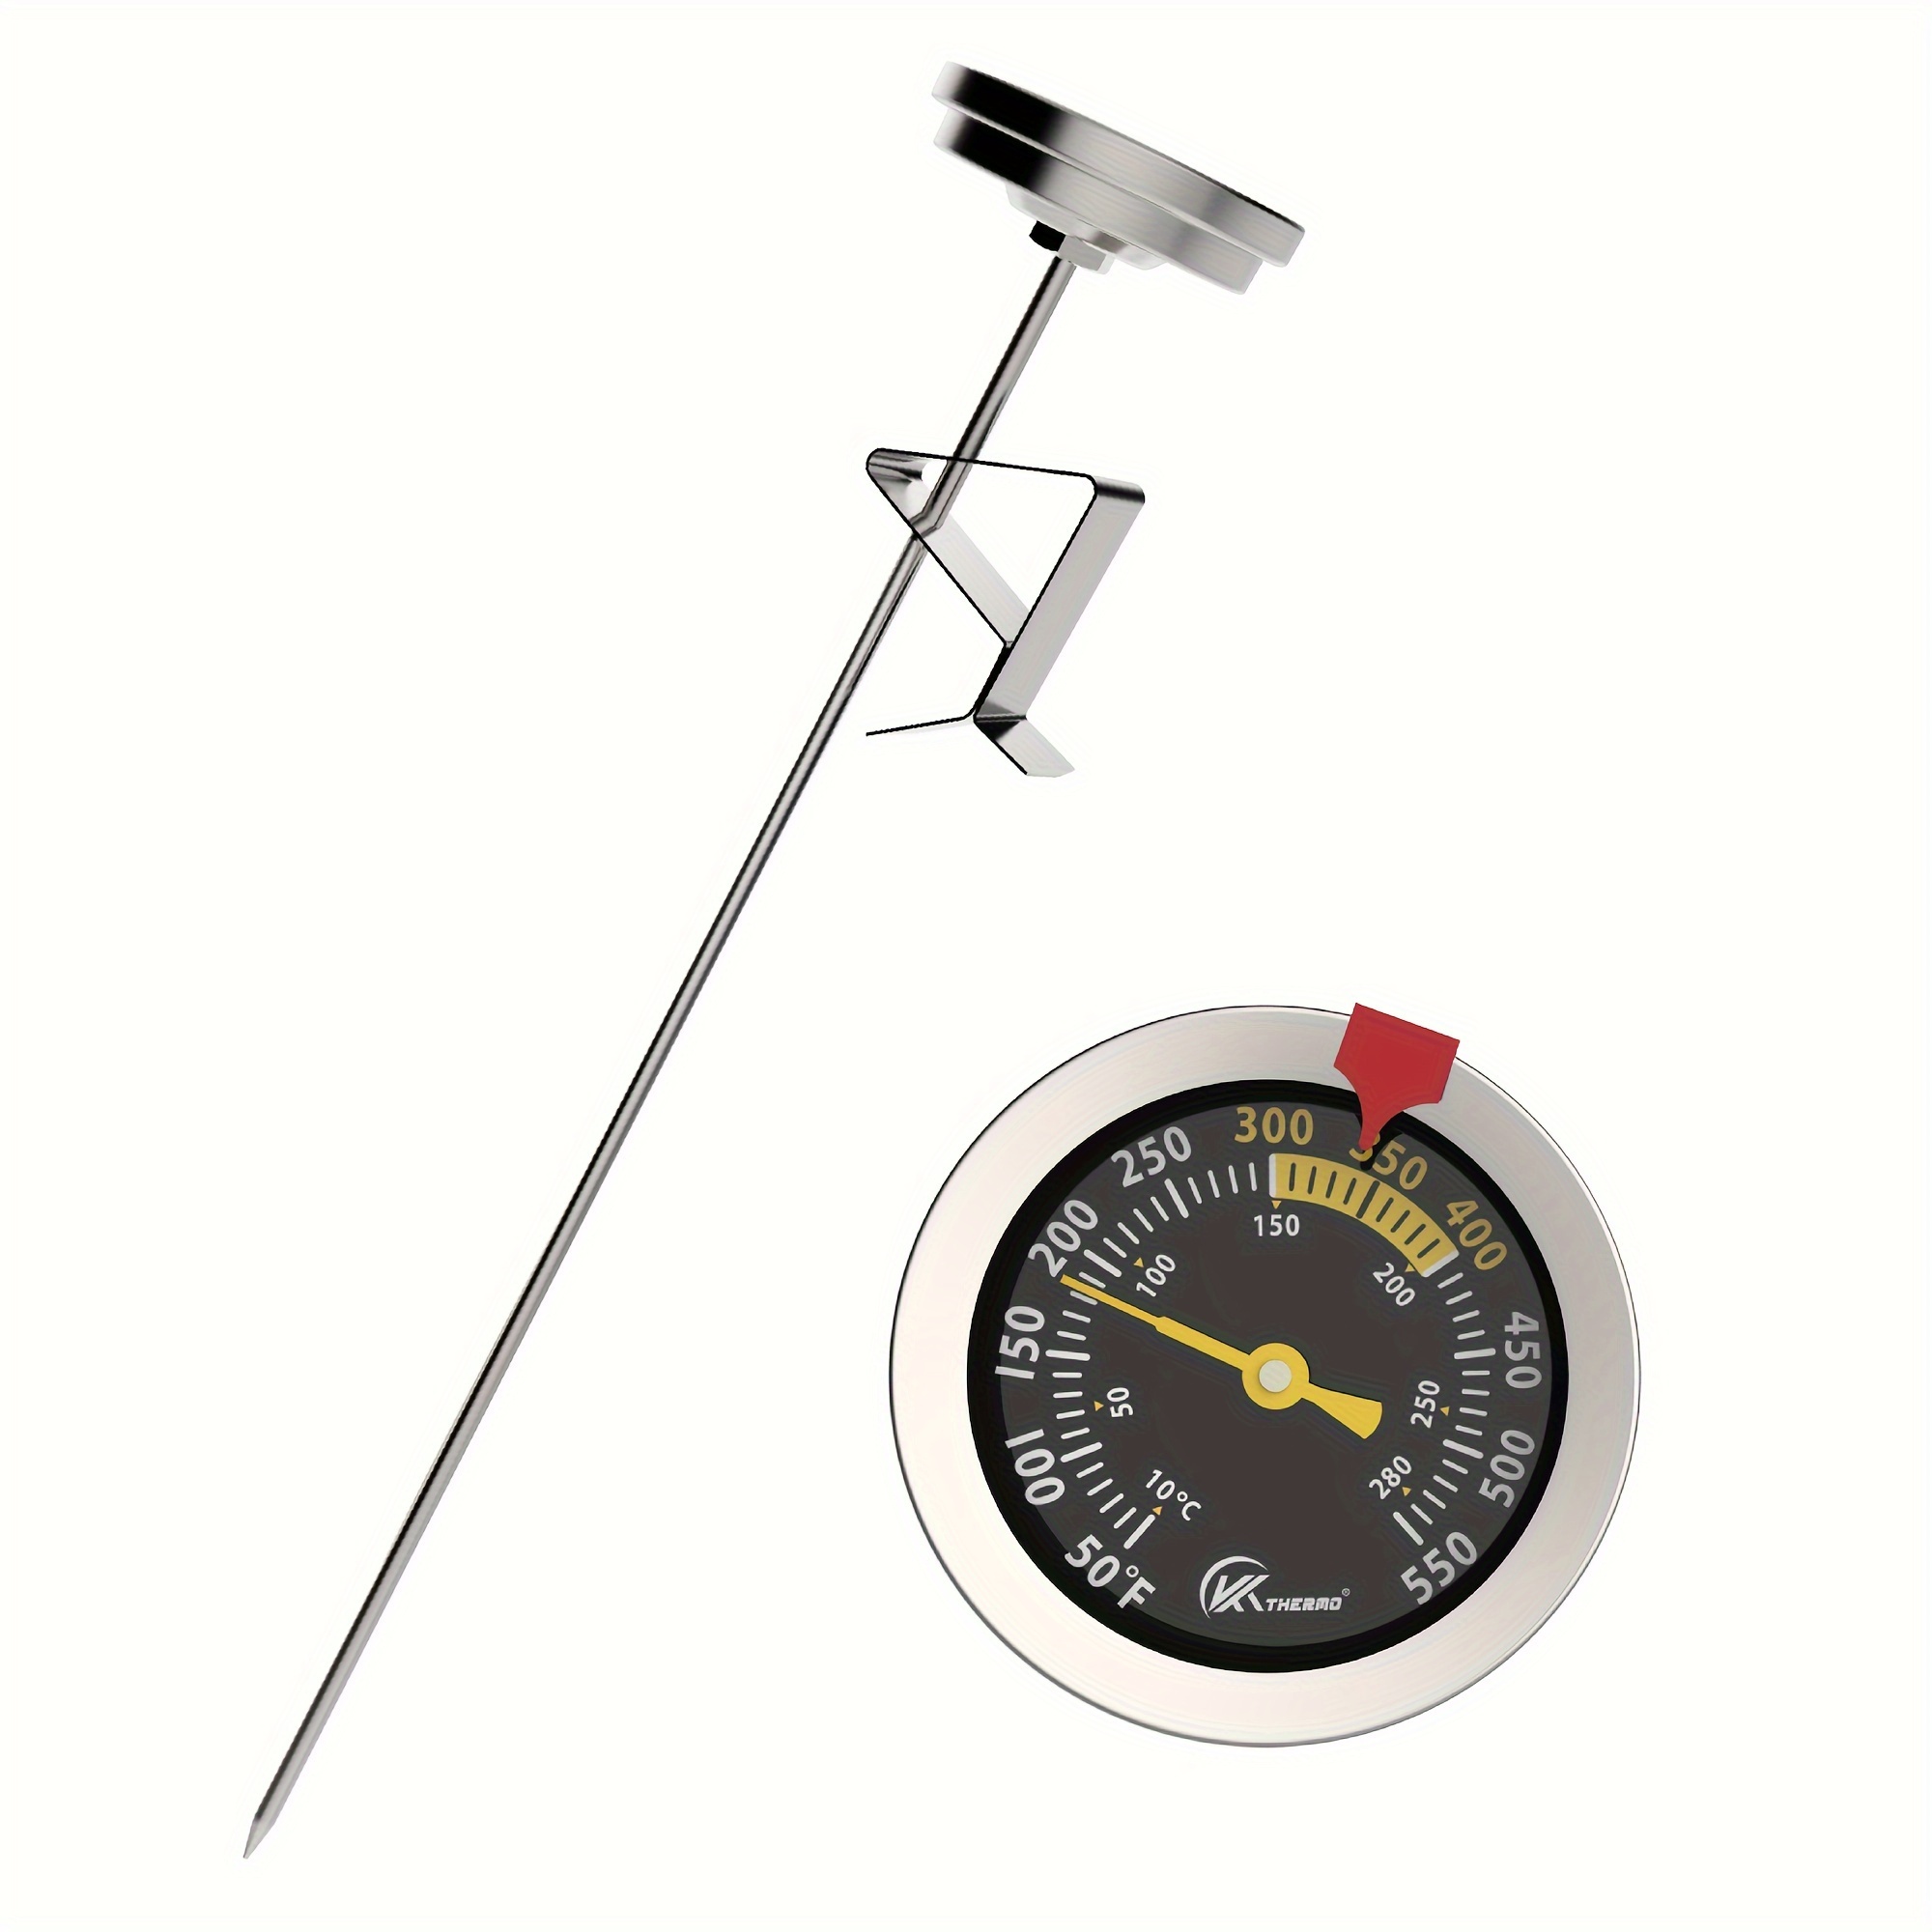 Deep Fry Thermometer With Dial And Stainless Steel Probe, Pot